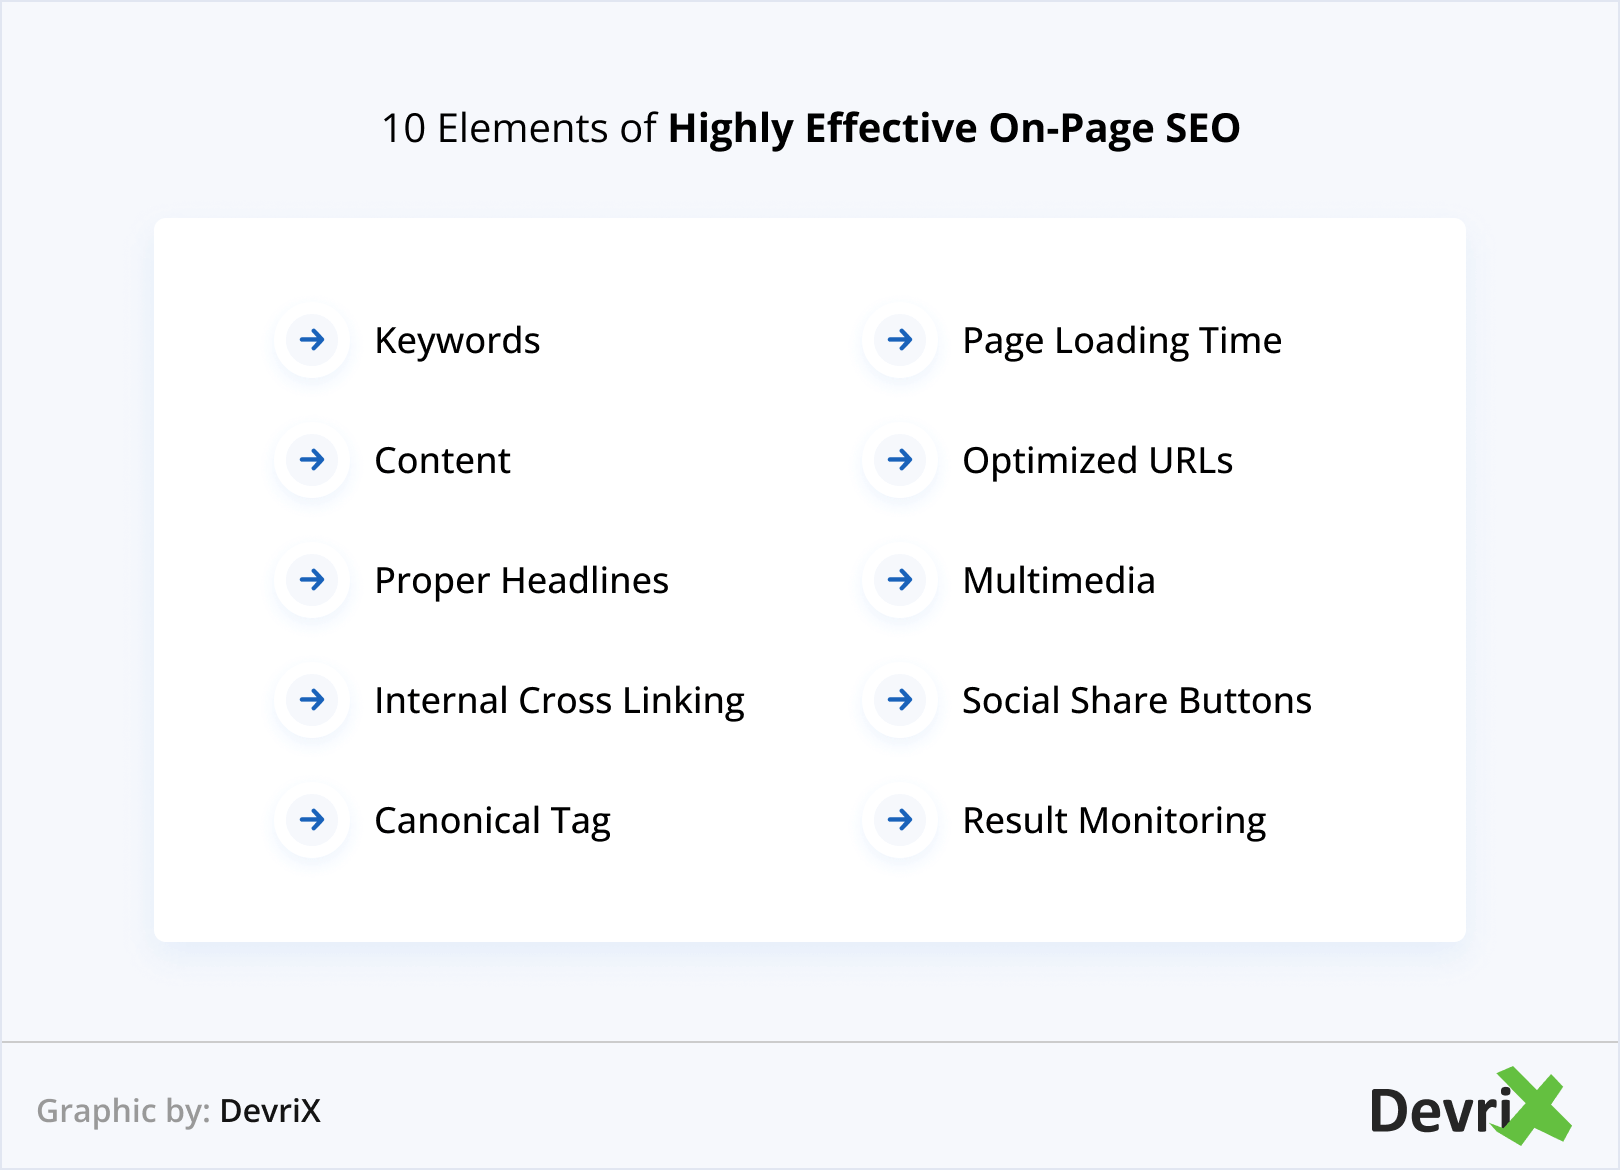 10 Elements of Highly Effective On-Page SEO